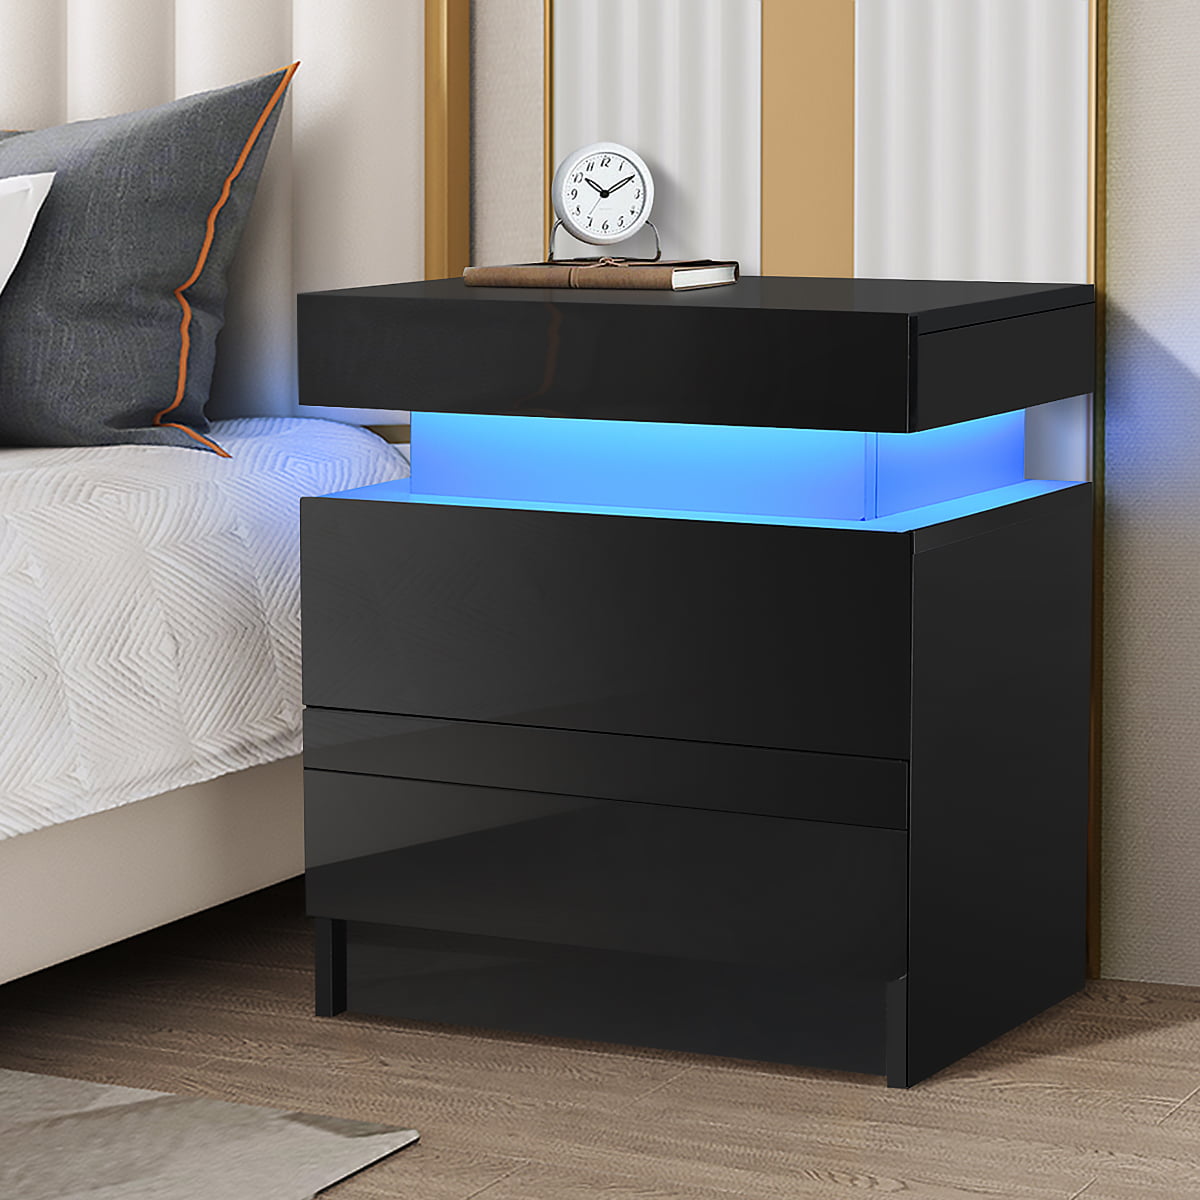 Details about   2 Drawer High Gloss Nightstand with RGB LED Black Modern Bedside End Table Remot 